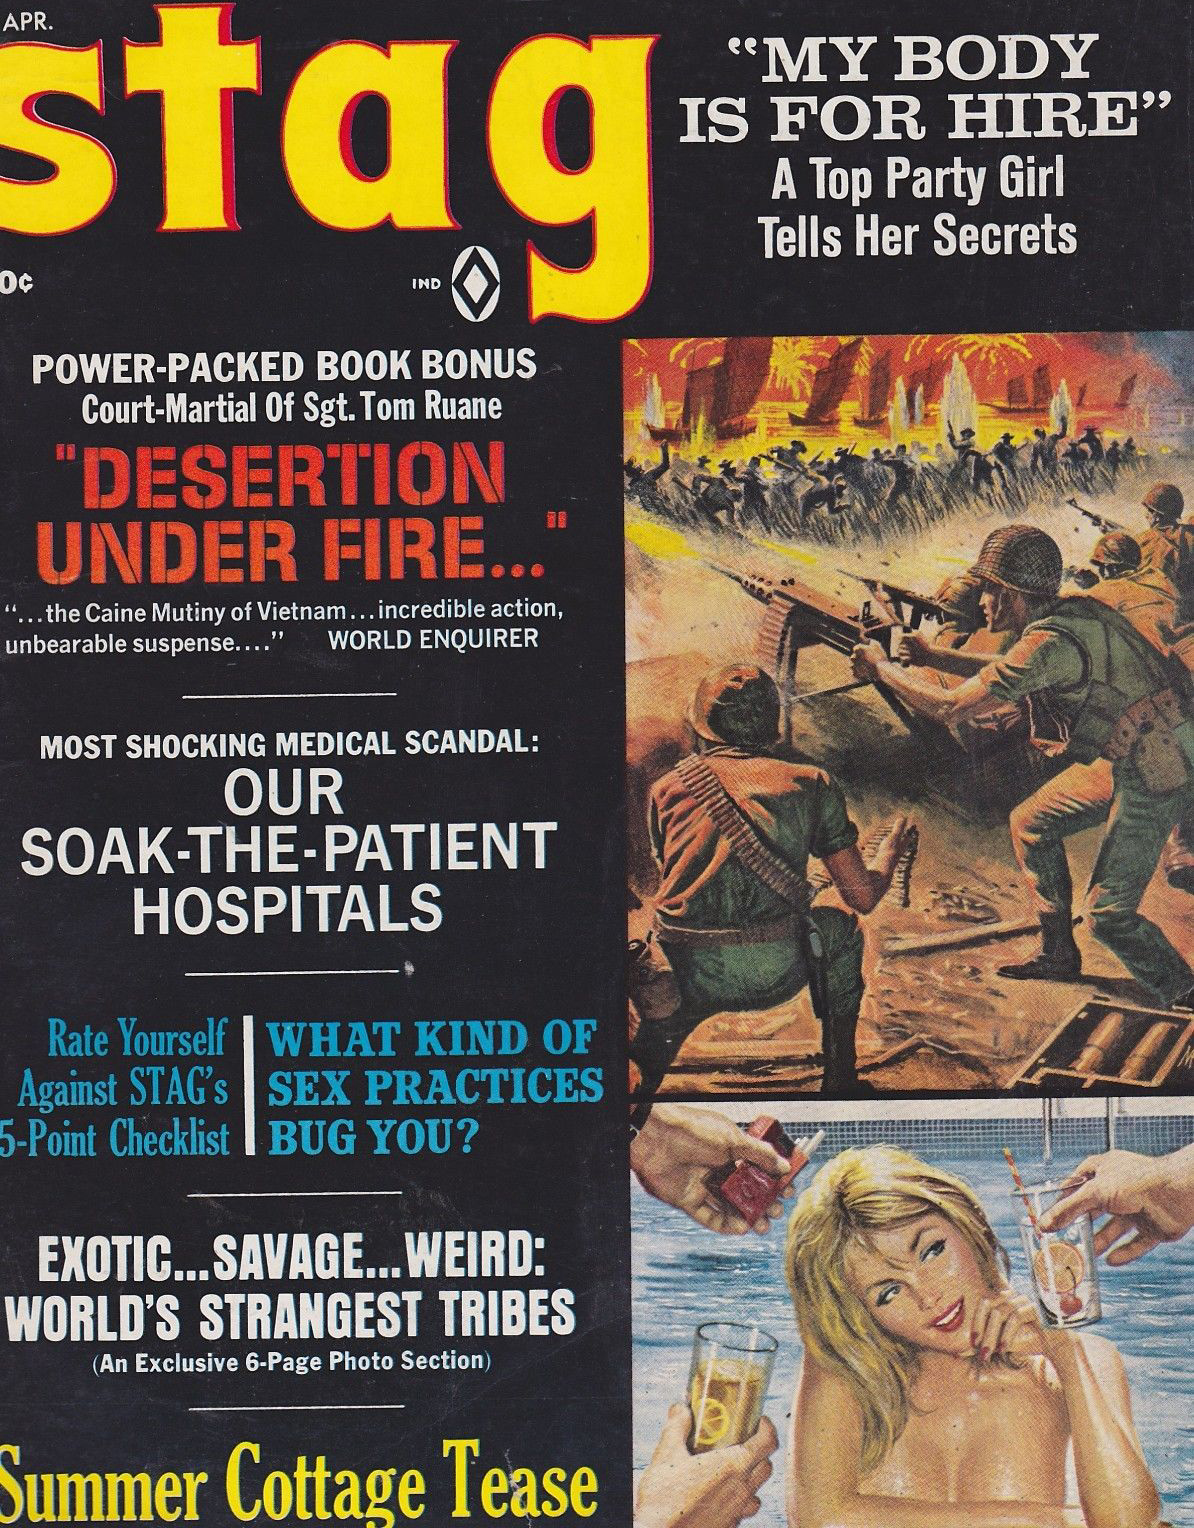 Stag April 1967 magazine back issue Stag magizine back copy Stag April 1967 Magazine for Men Adult Back Issue Published by Leeds Publishing Corp. My Body Is For Hire A Top Party Girl Tells Her Secrets.